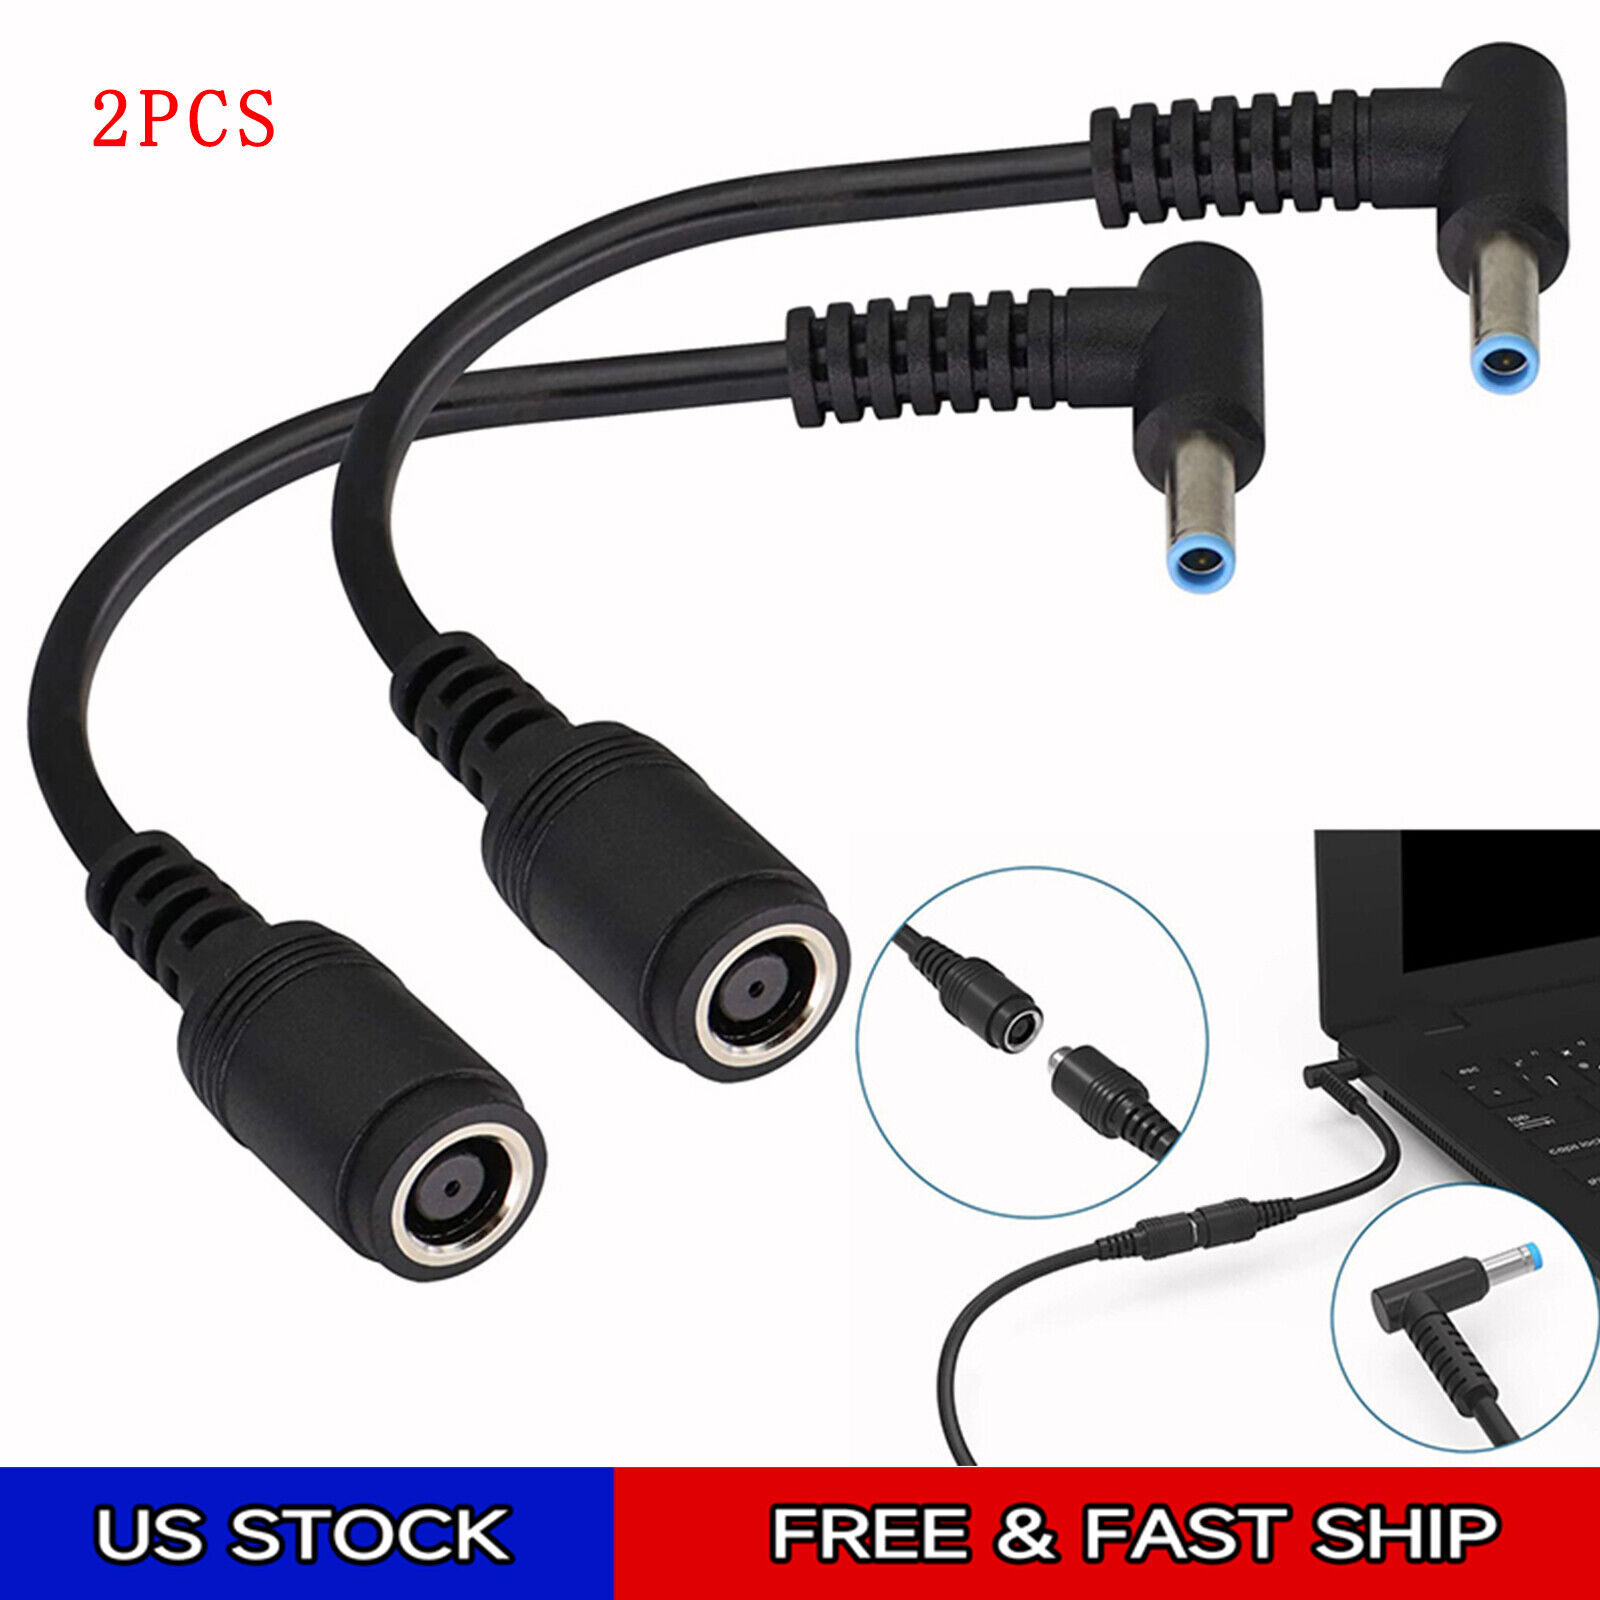 2Pcs DC Power Charger Adapter Cable 7.4mmx5.0mm To 4.5mmx3.0mm For HP Blue Tips